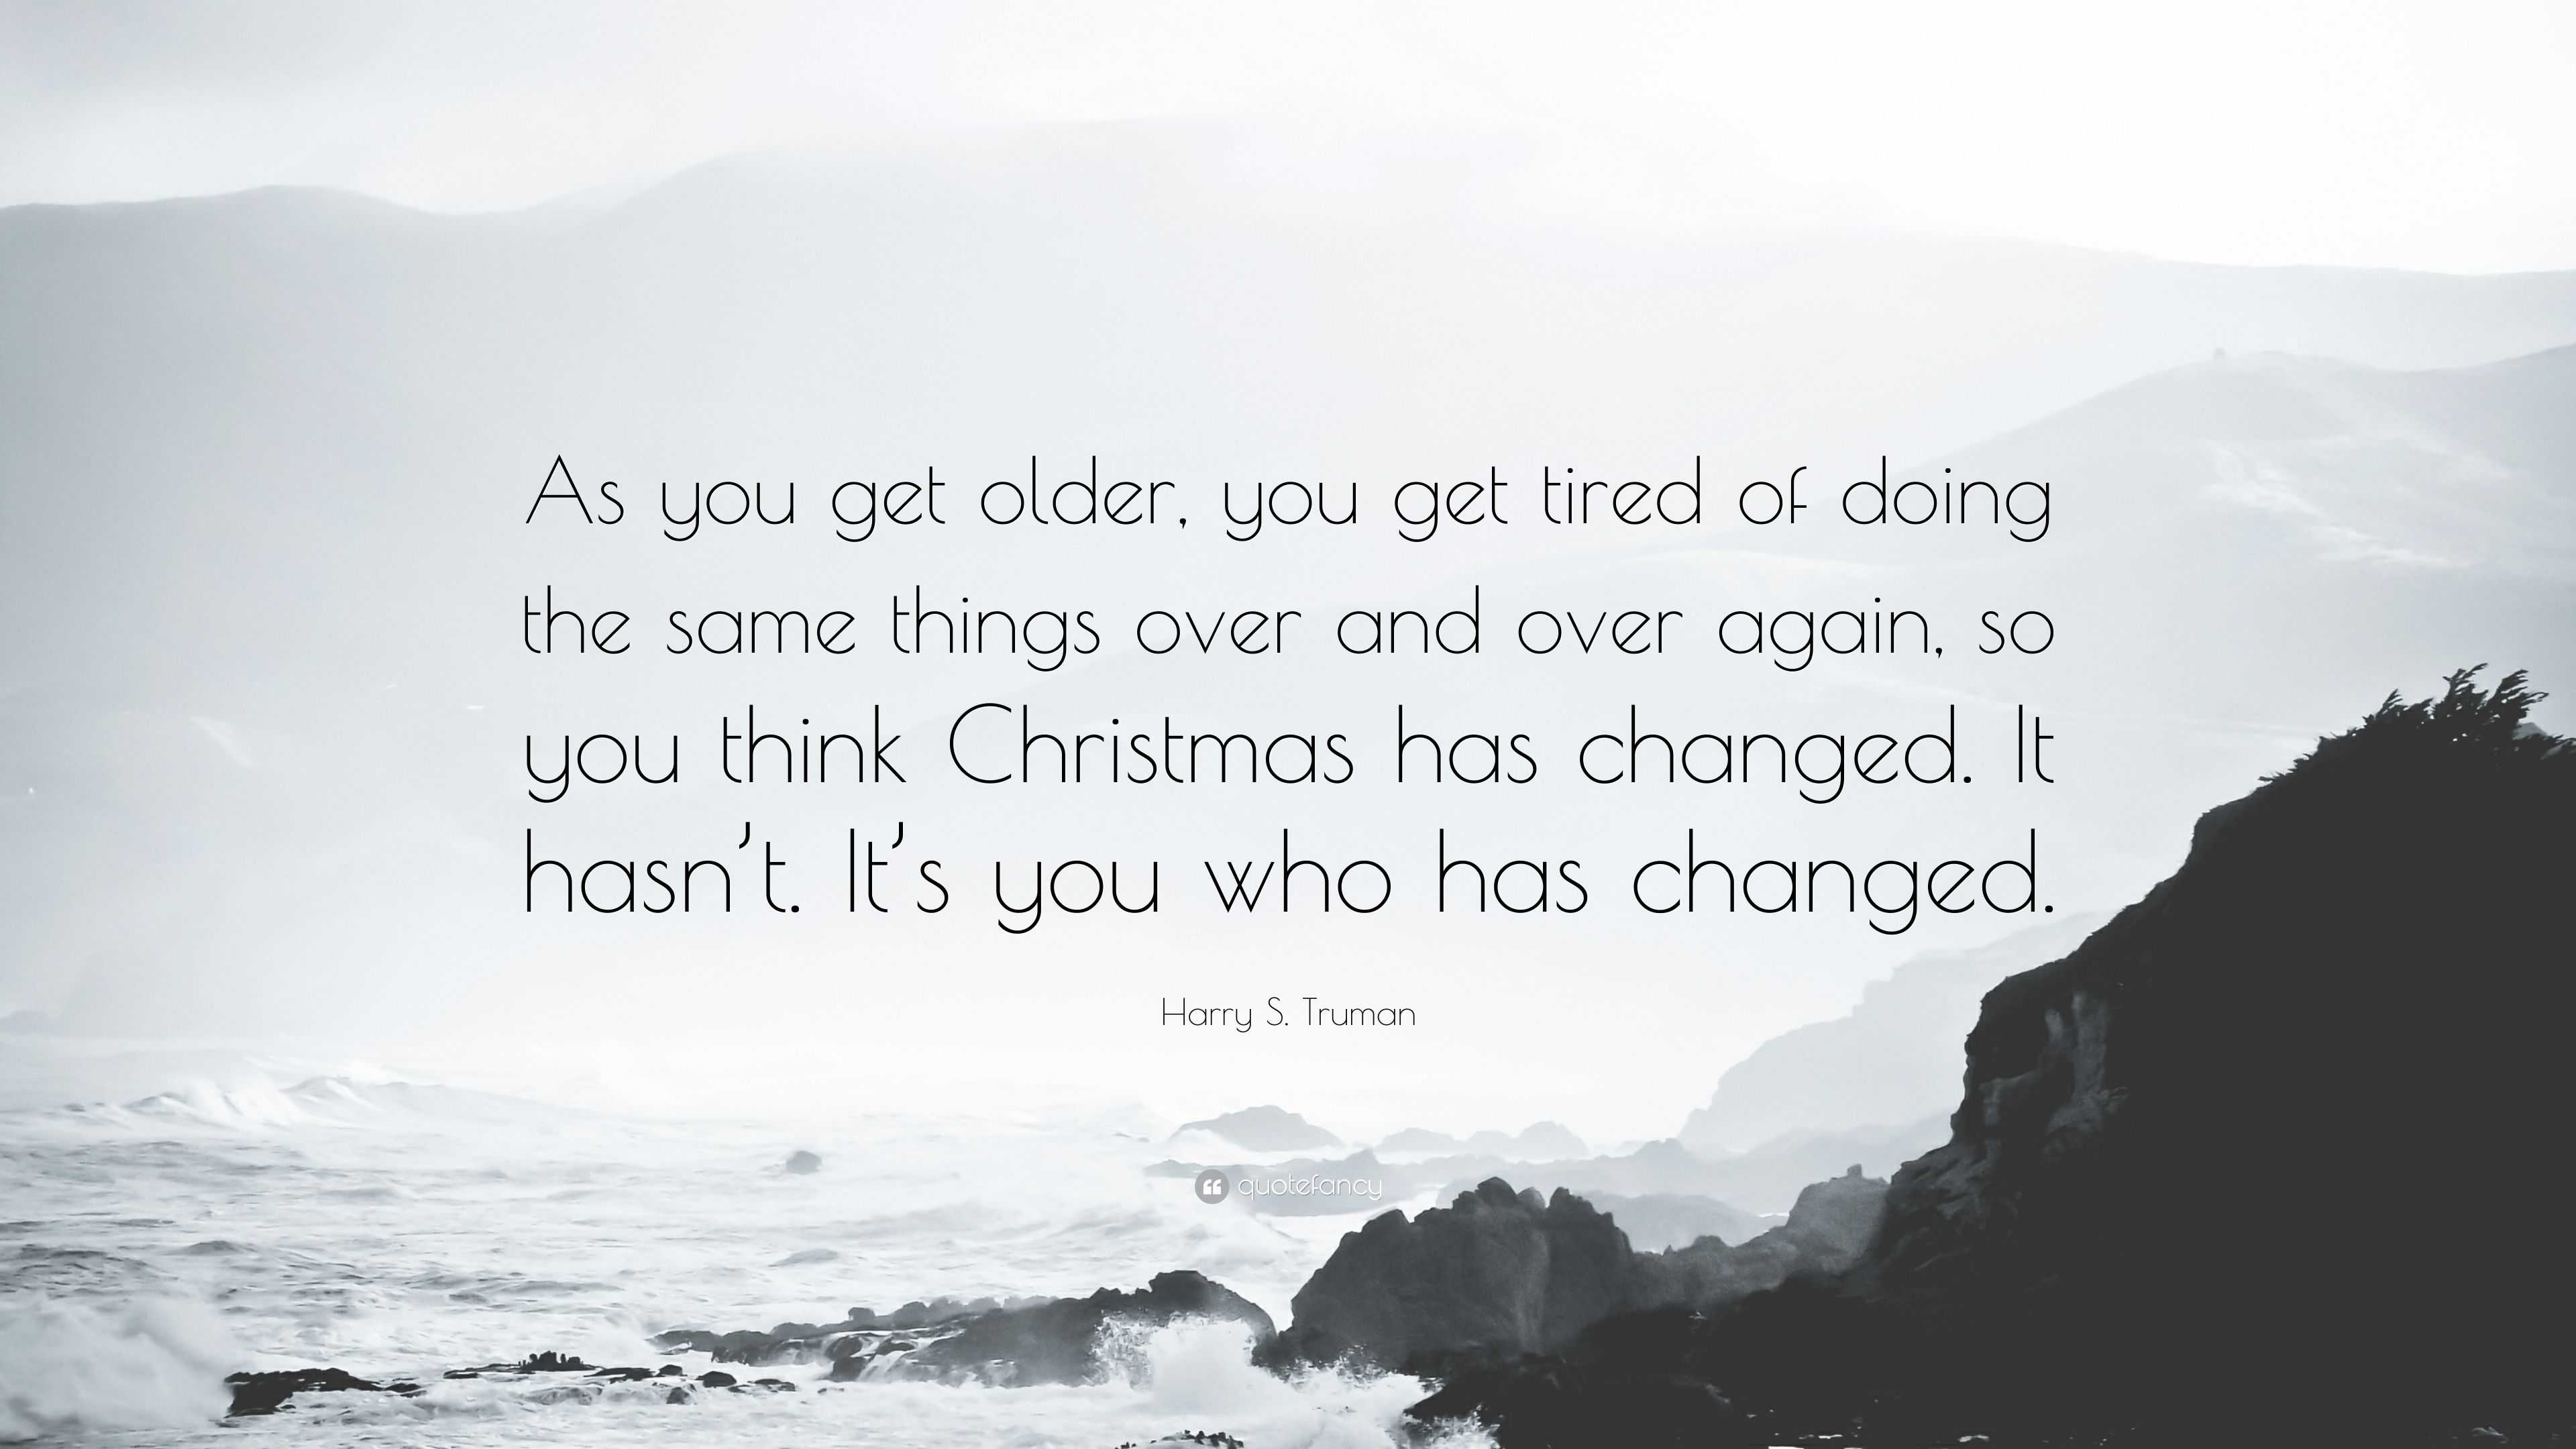 Harry S. Truman Quote: “As you get older, you get tired of doing the ...